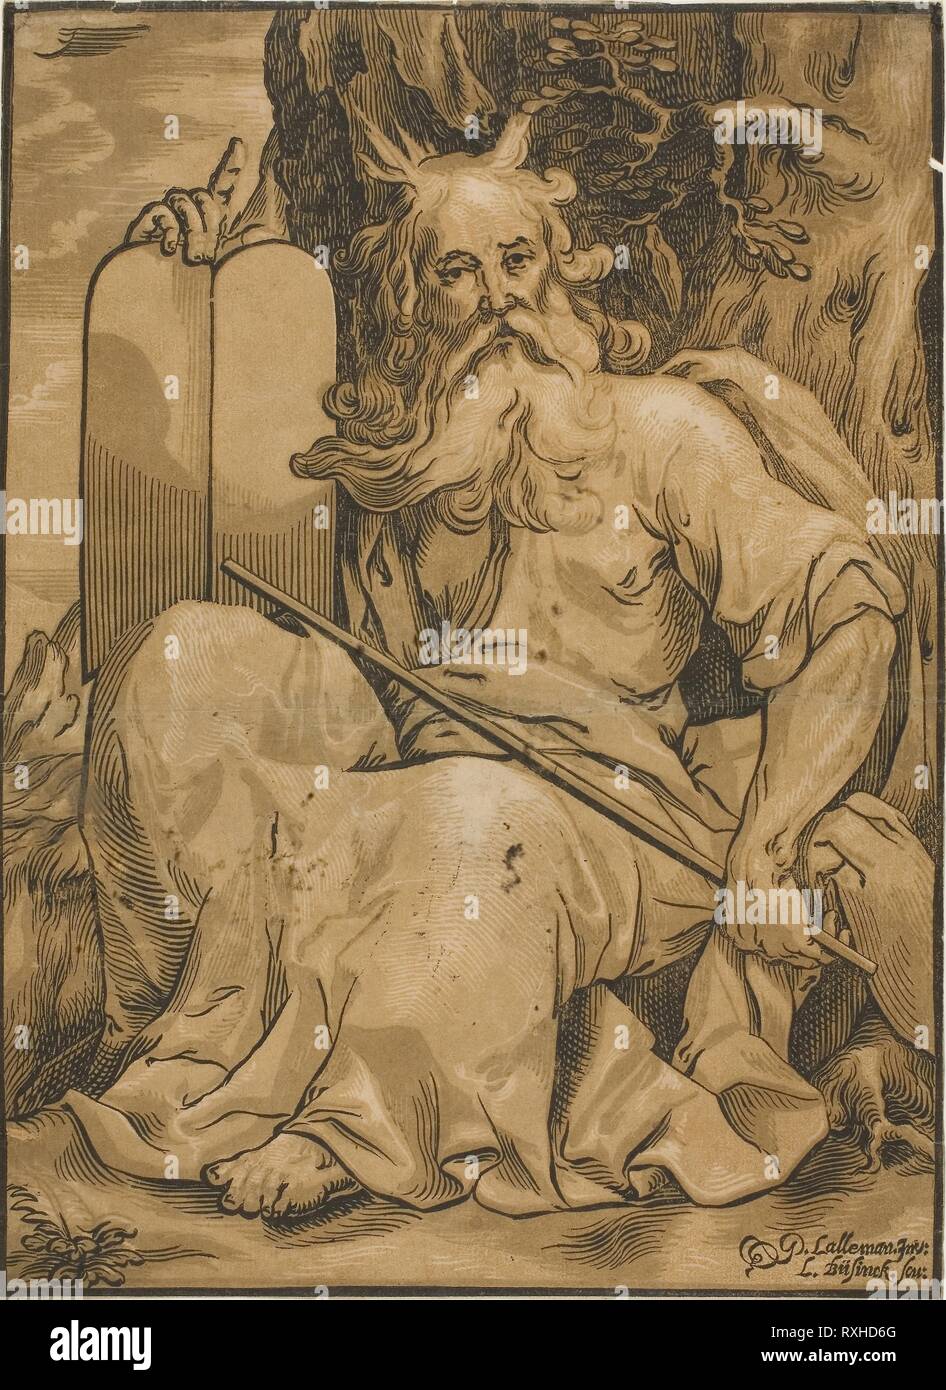 Moses with the Tables of the Law. Ludolph Büsinck (German, 1585-1648); after G.L'Allemand. Date: 1605-1648. Dimensions: 390 x 283 mm. Chiaroscuro woodcut from three blocks on paper. Origin: Germany. Museum: The Chicago Art Institute. Author: Ludolph Büsinck. Ludwig Büsinck after Georges Lallemand. Stock Photo